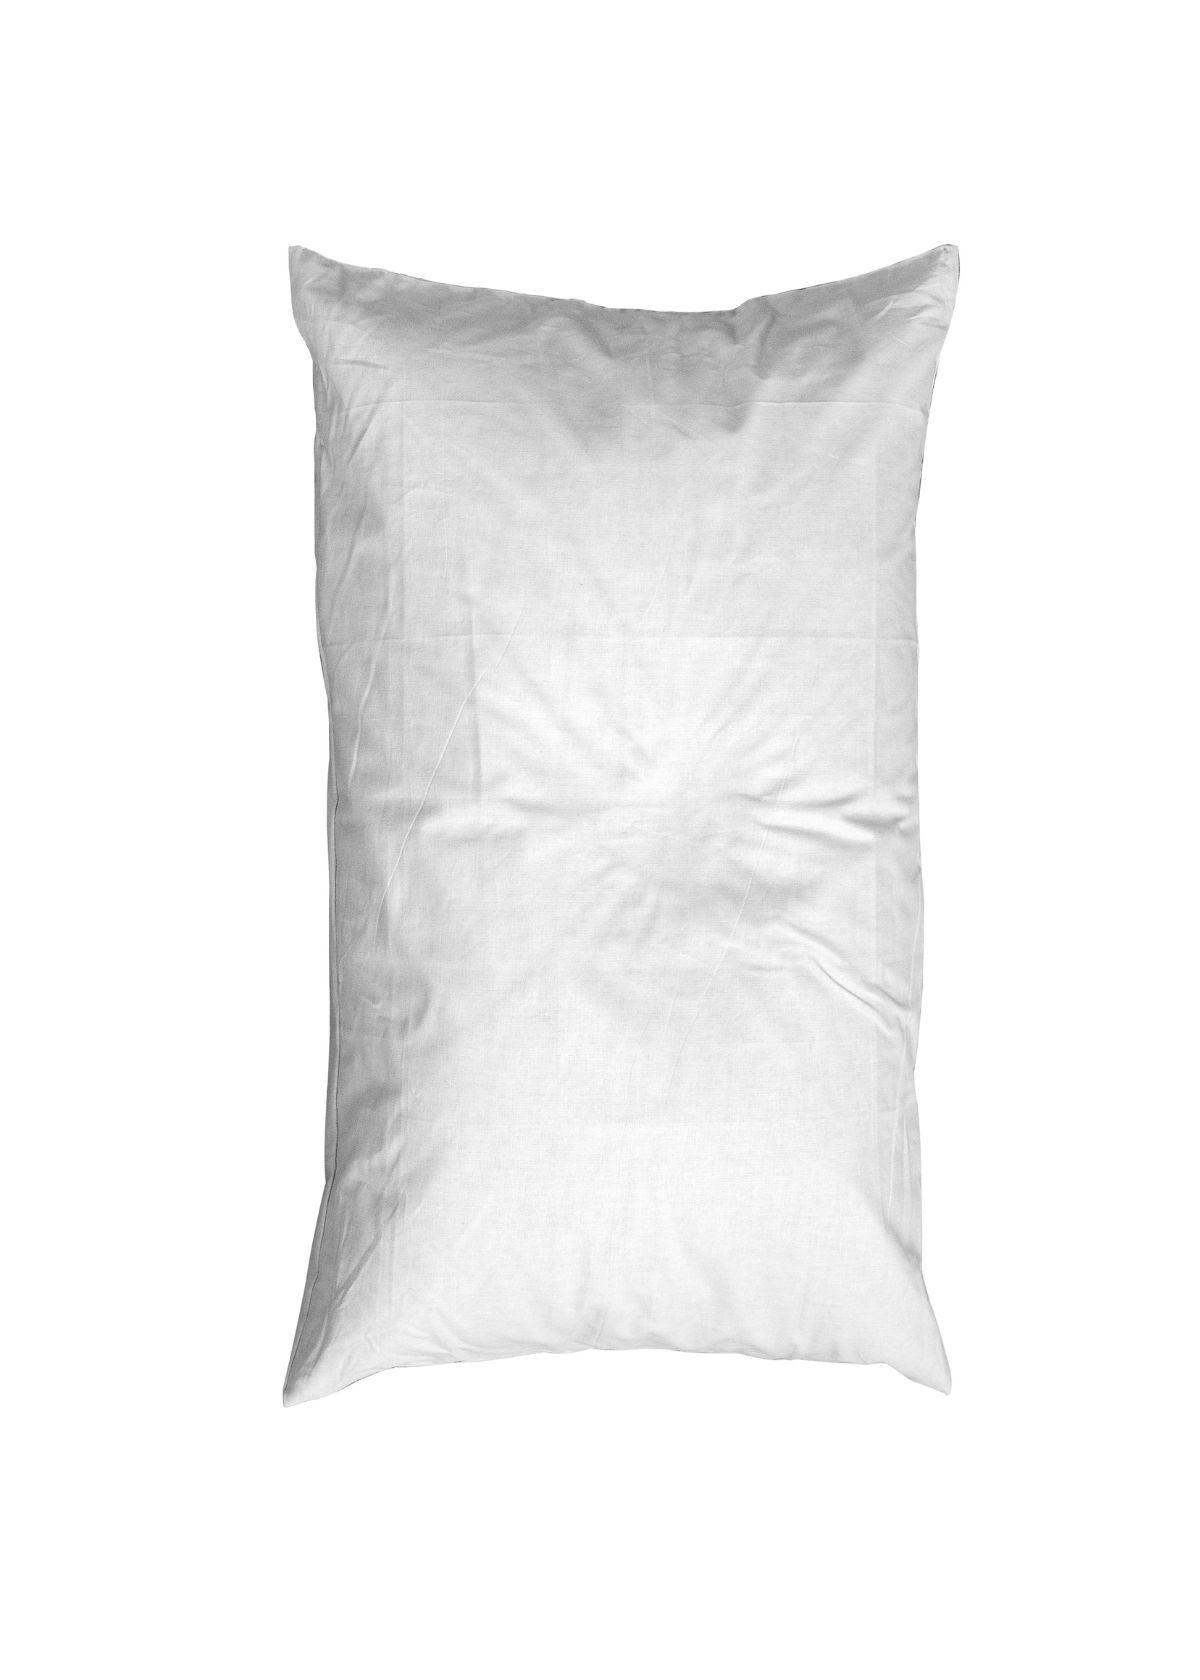 How to Wash Outdoor Pillow Covers